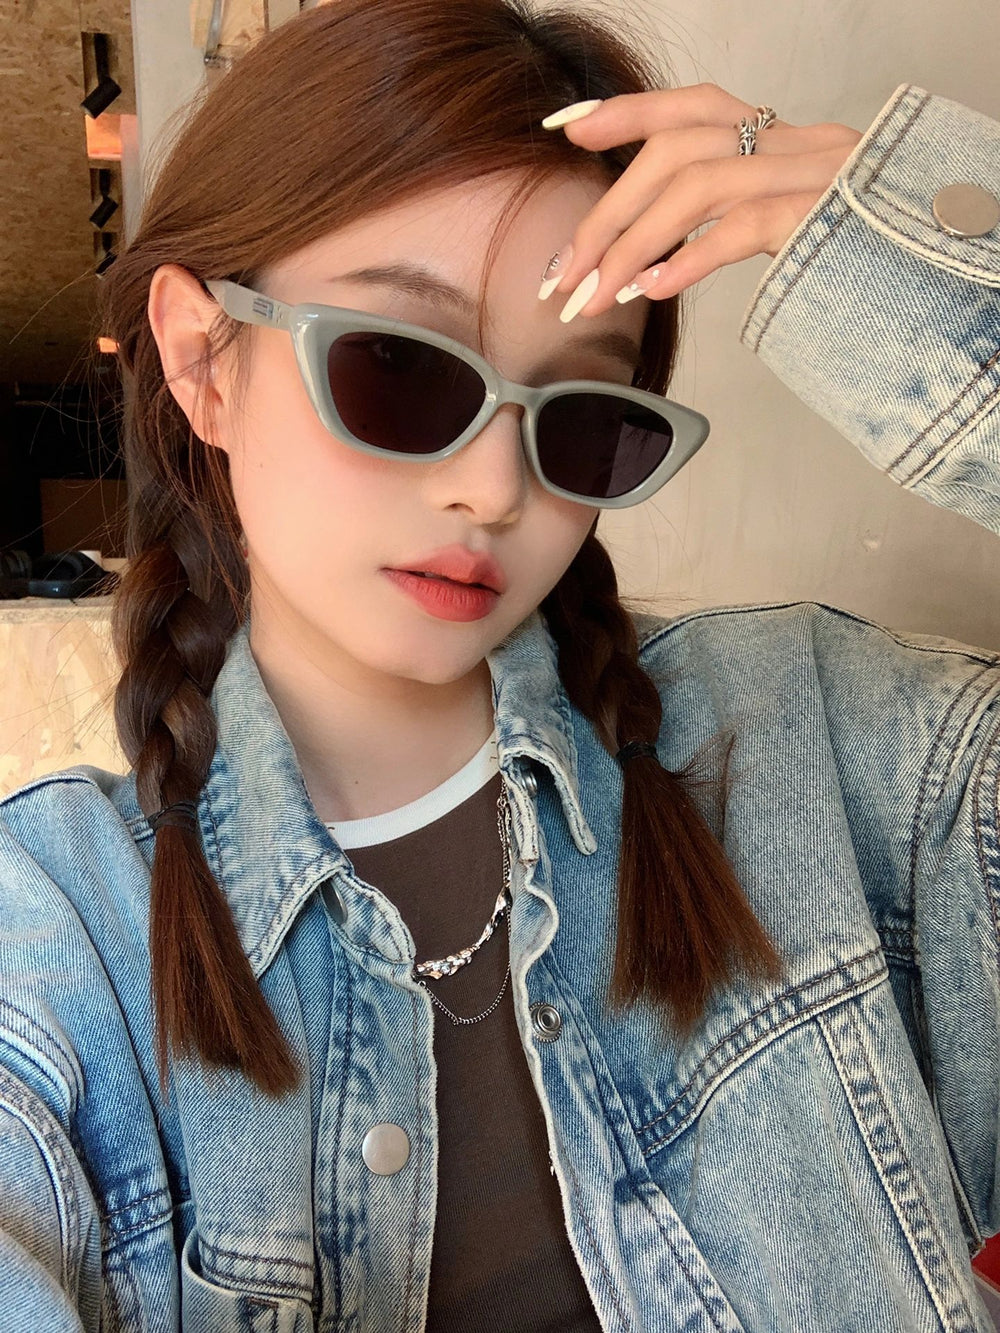 An image of a woman in a denim jacket and sunglasses, radiating a trendy and fashionable look.